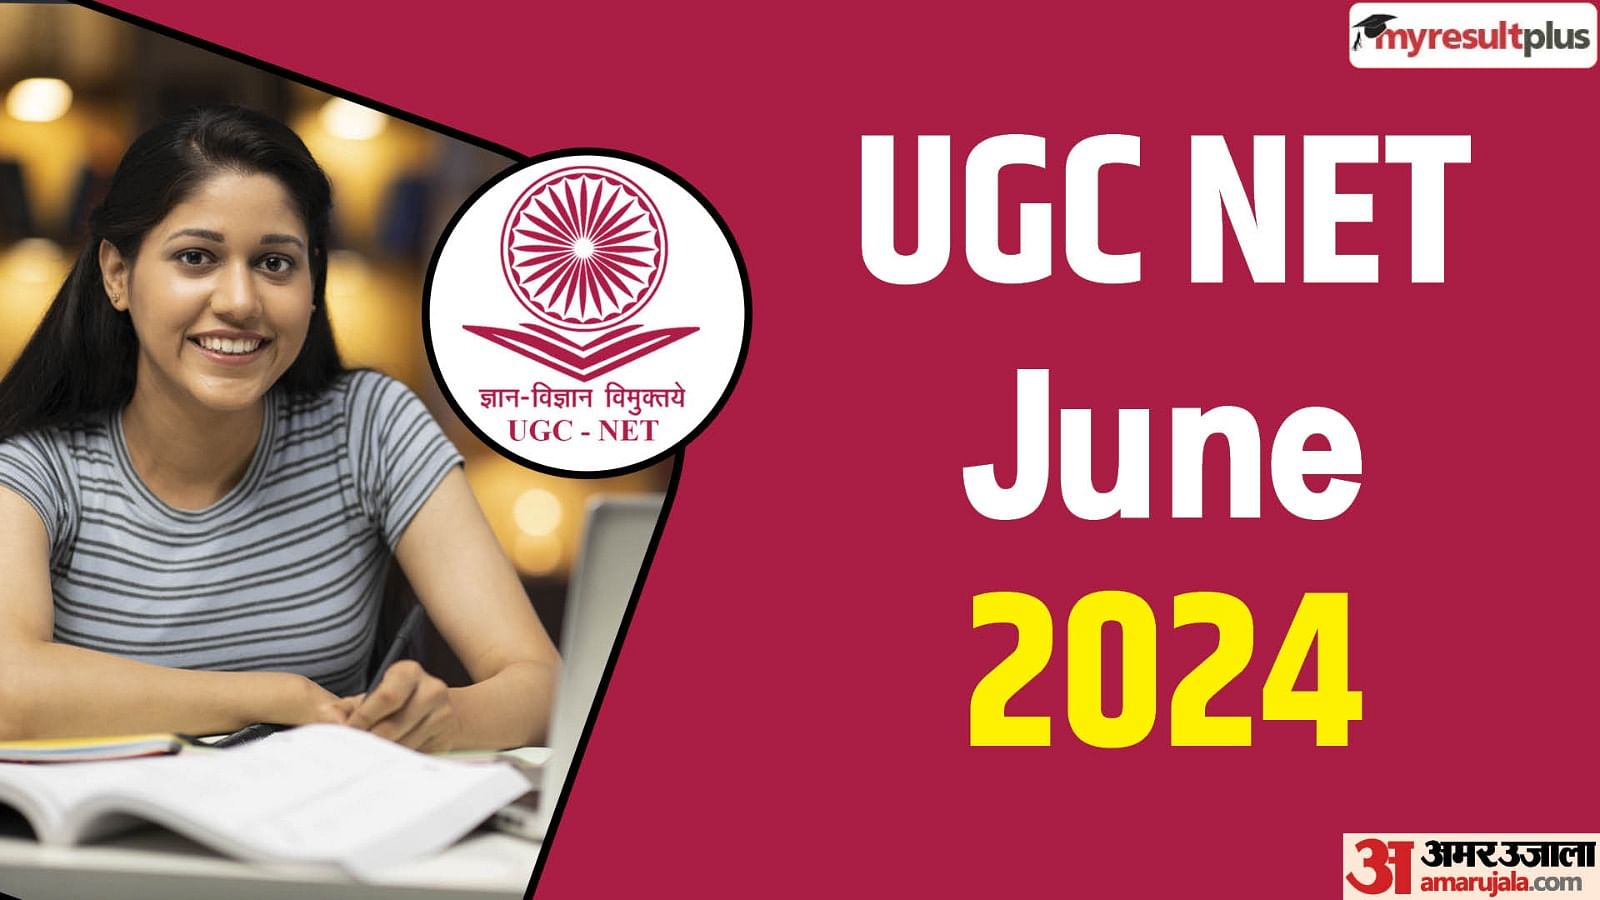 UGC NET 2024 registration window extended; Check date and how to apply, Read more details here